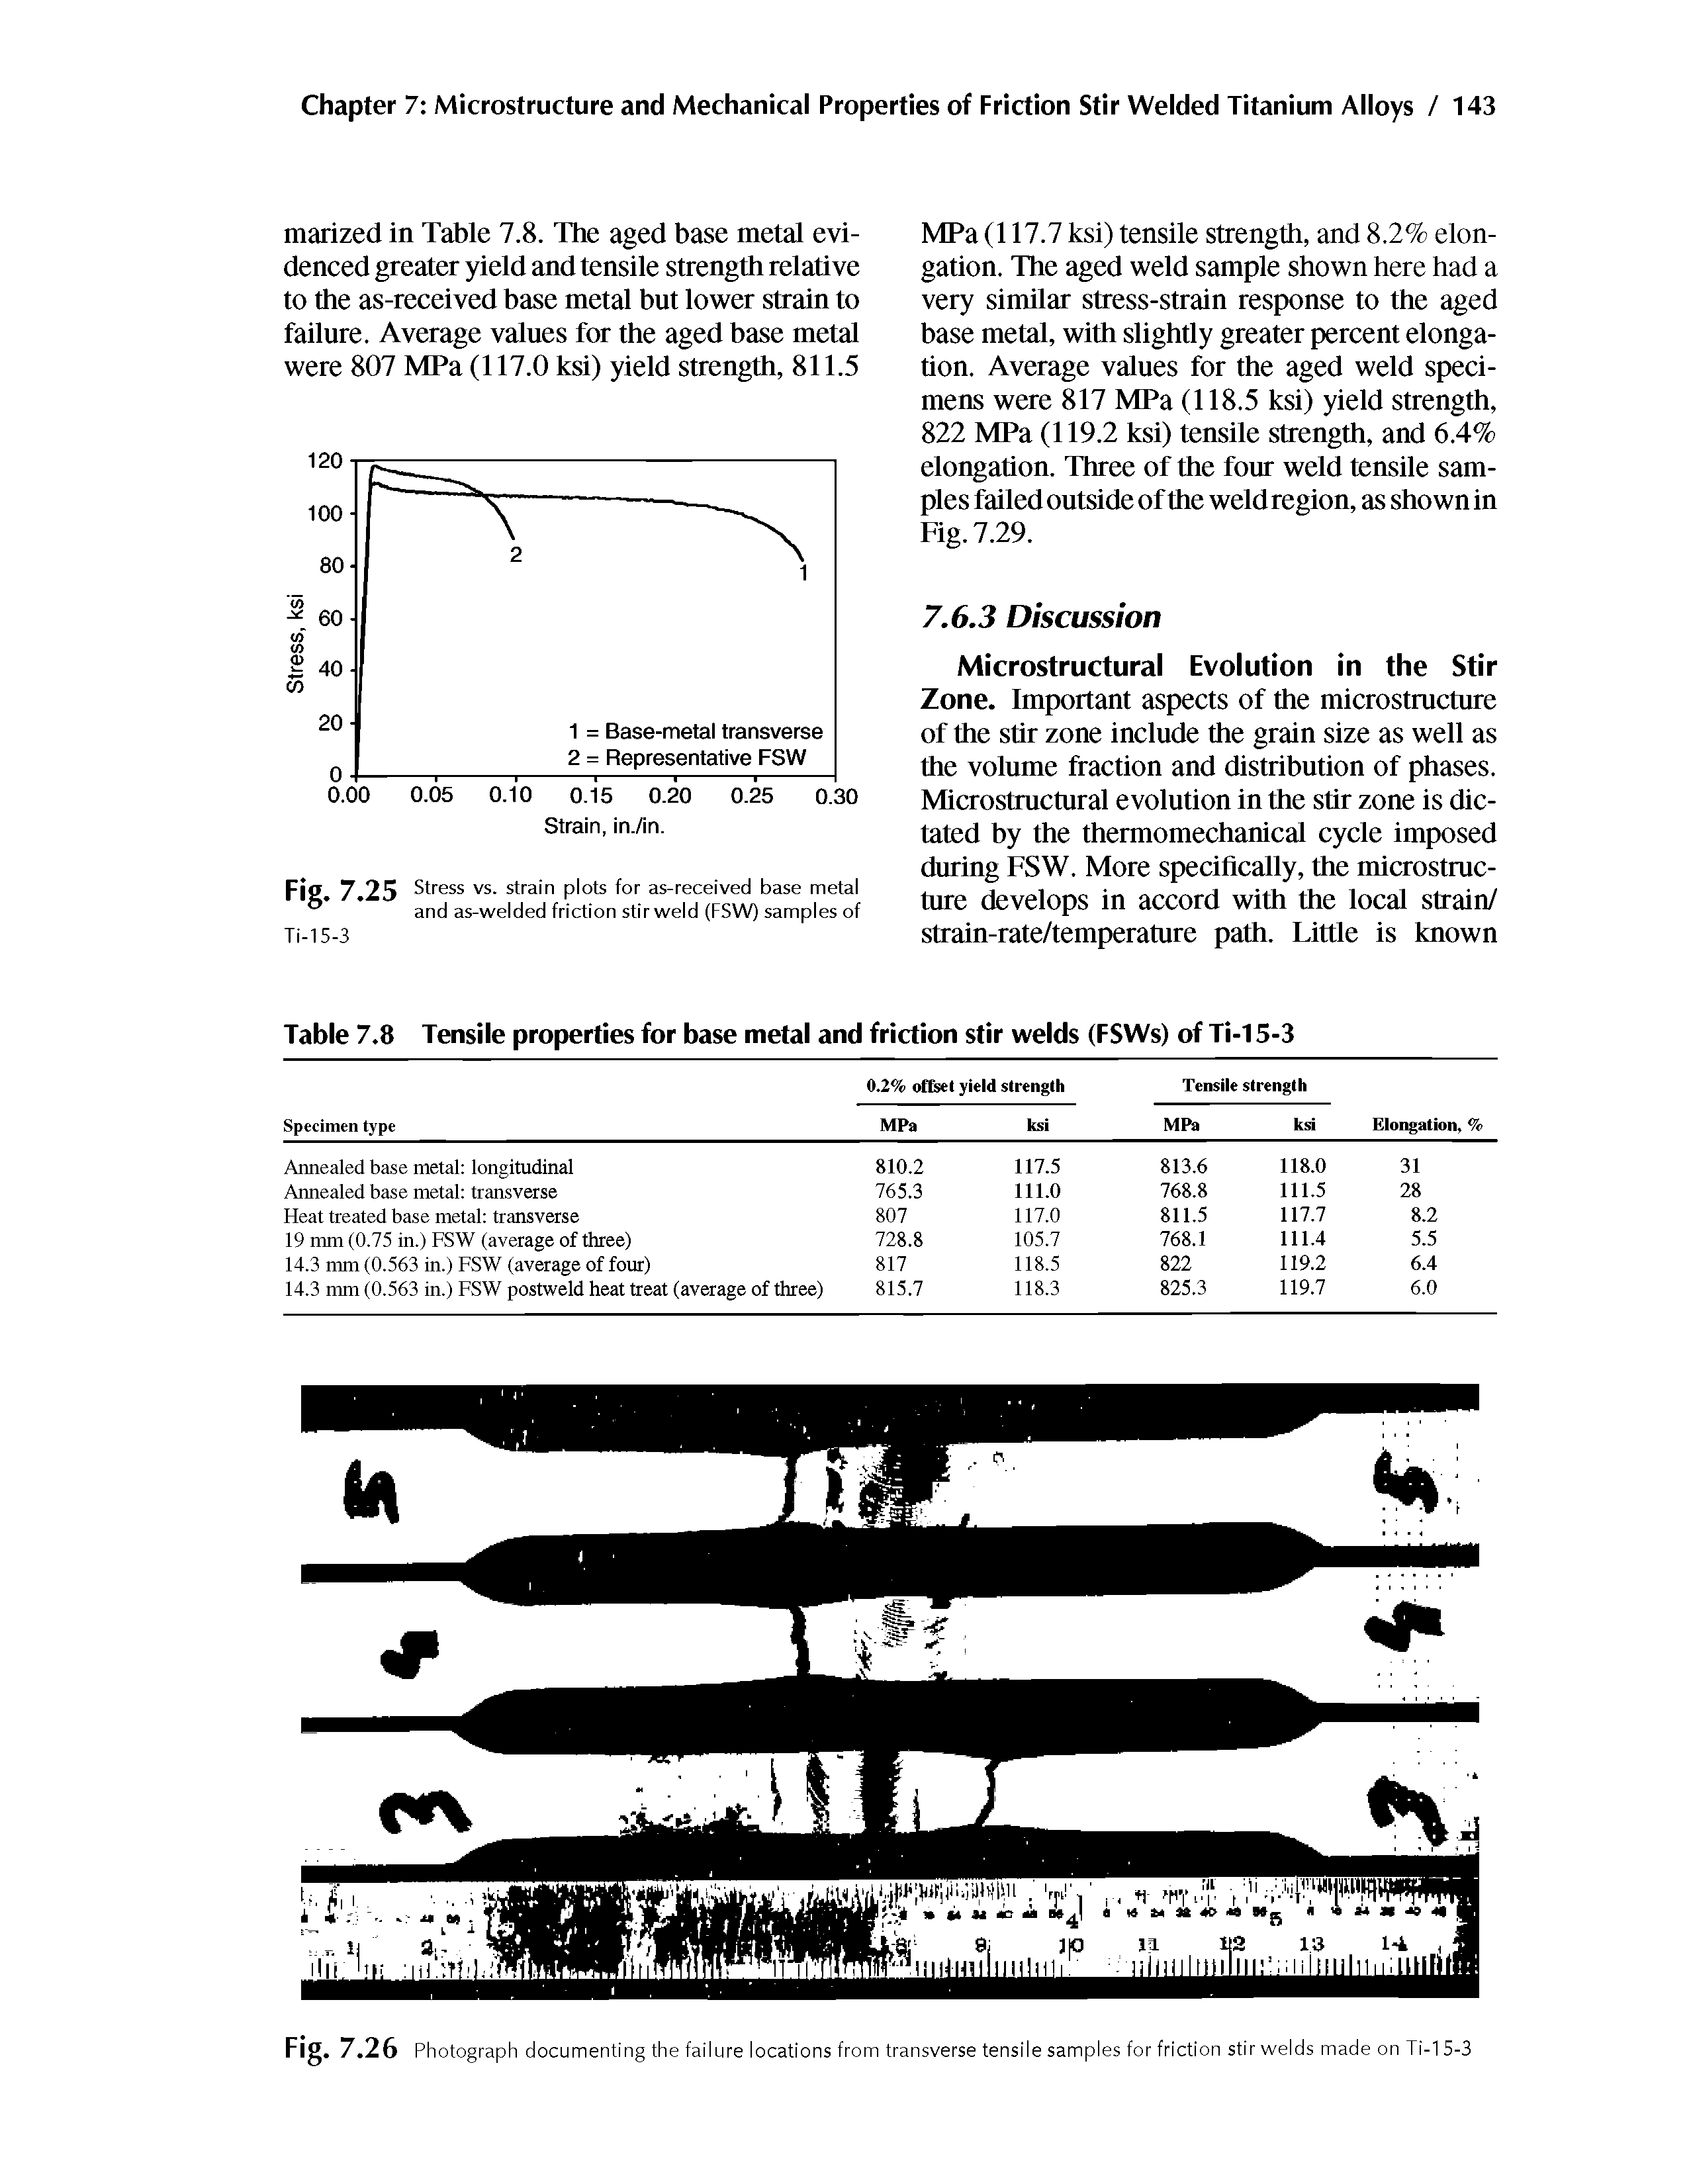 Fig. 7.26 Photograph documenting the failure locations from transverse tensile samples for friction stir welds made on Ti-1 5-3...